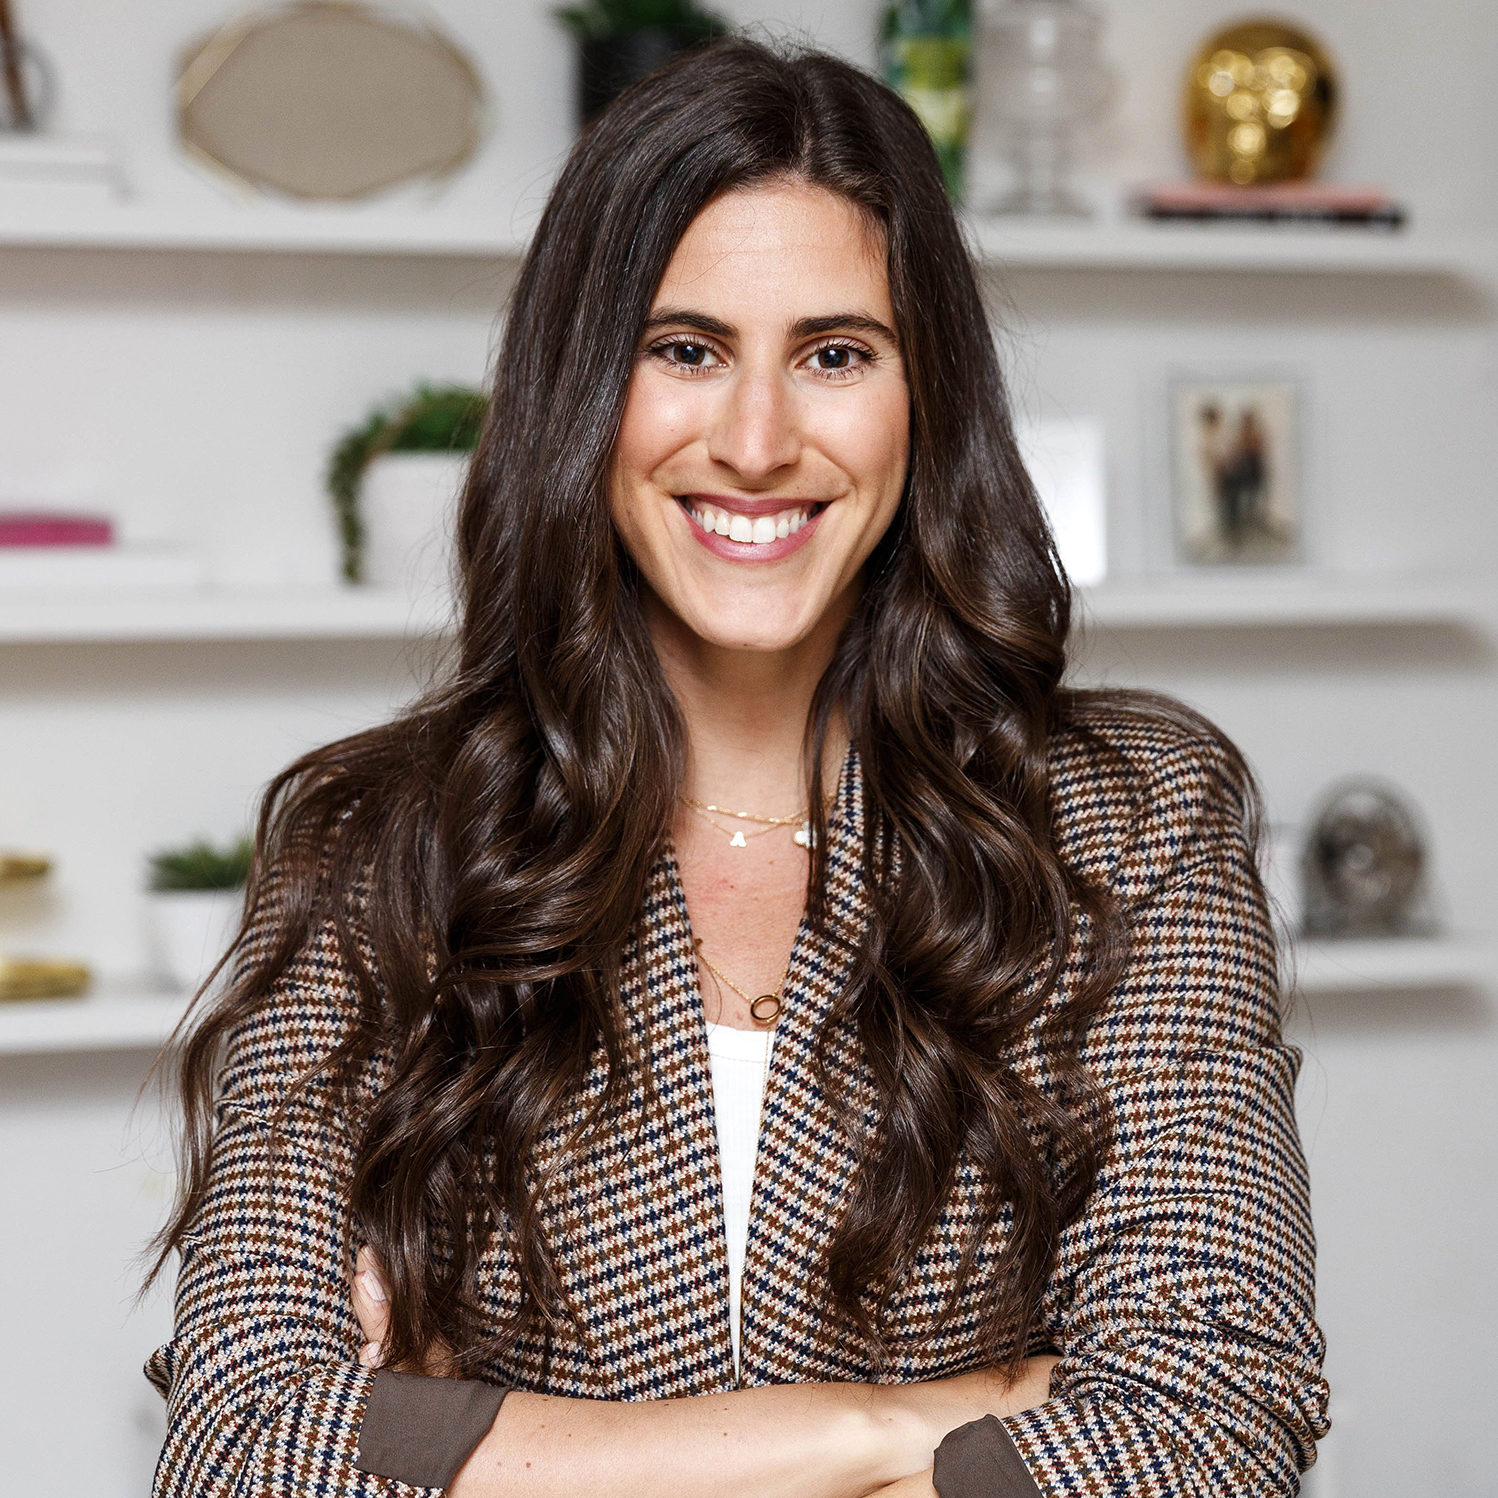 EXCLUSIVE: Amanda Zuckerman, 28, founded Manhattan-based Dormify in 2012 after encountering too many juvenile designs when trying to outfit her own room at Washington University in St. Louis. Dormify sells products for dorms and offers co-eds free design advice. She says that the ever-increasing desire for a perfectly outfitted dorm can be credited to one platform. **NO NEW YORK DAILY NEWS, NO NEW YORK TIMES, NO NEWSDAY**. 05 Sep 2019 Pictured: Amanda Zuckerman, founder of Dormify, is pictured in their showroom. Photo credit: Annie Wermiel/NY Post / MEGA TheMegaAgency.com +1 888 505 6342 (Mega Agency TagID: MEGA503006_002.jpg) [Photo via Mega Agency]